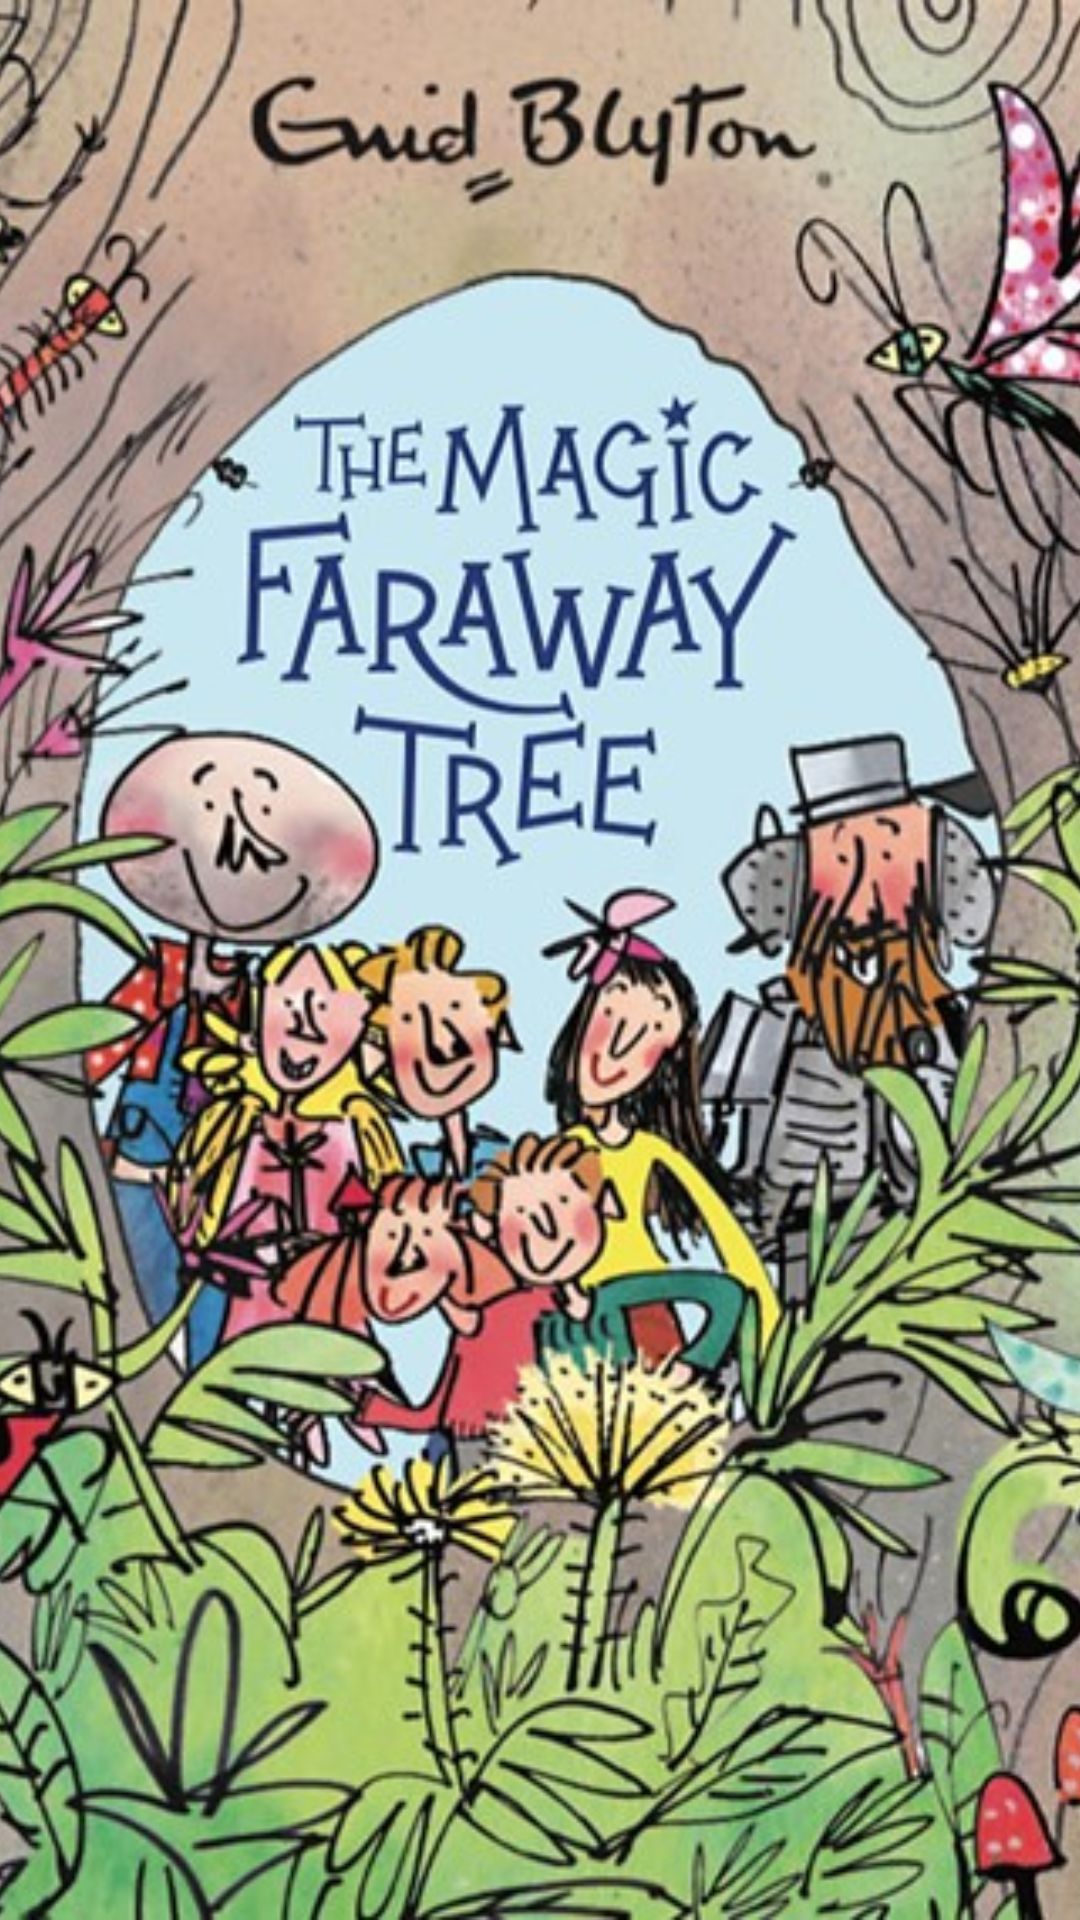 The cover of enid blyton's book The Magic Faraway Tree